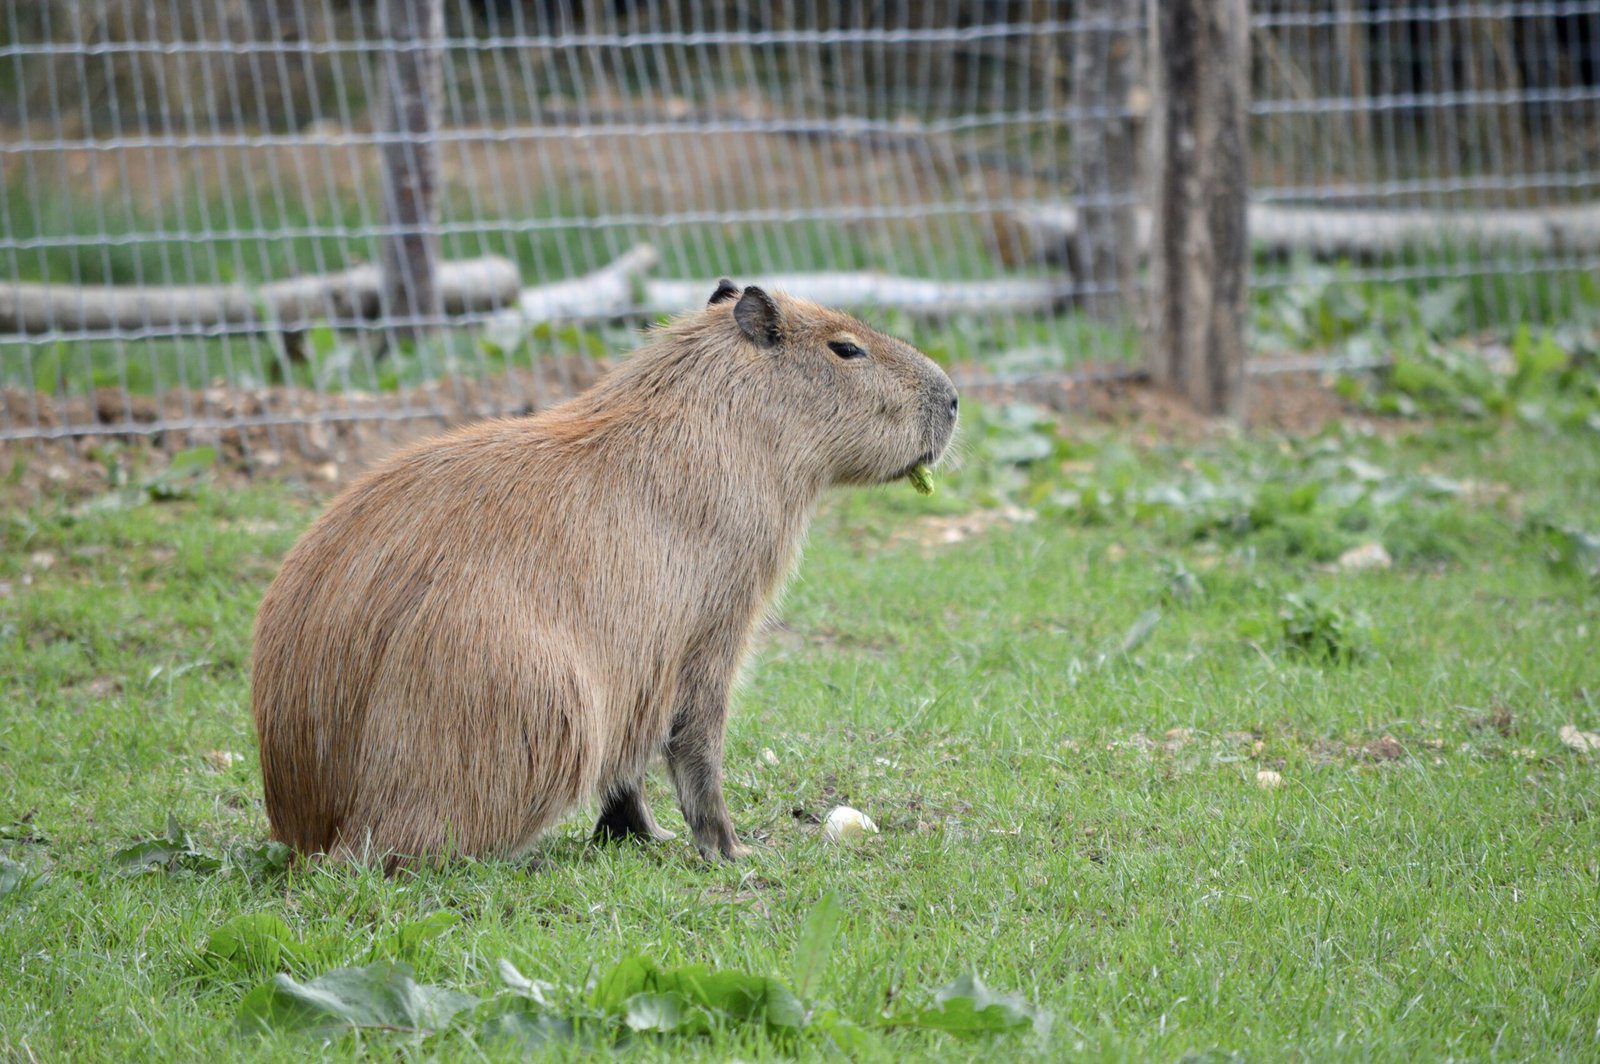 A Beginners Guide: How to Buy a Capybara in the UK